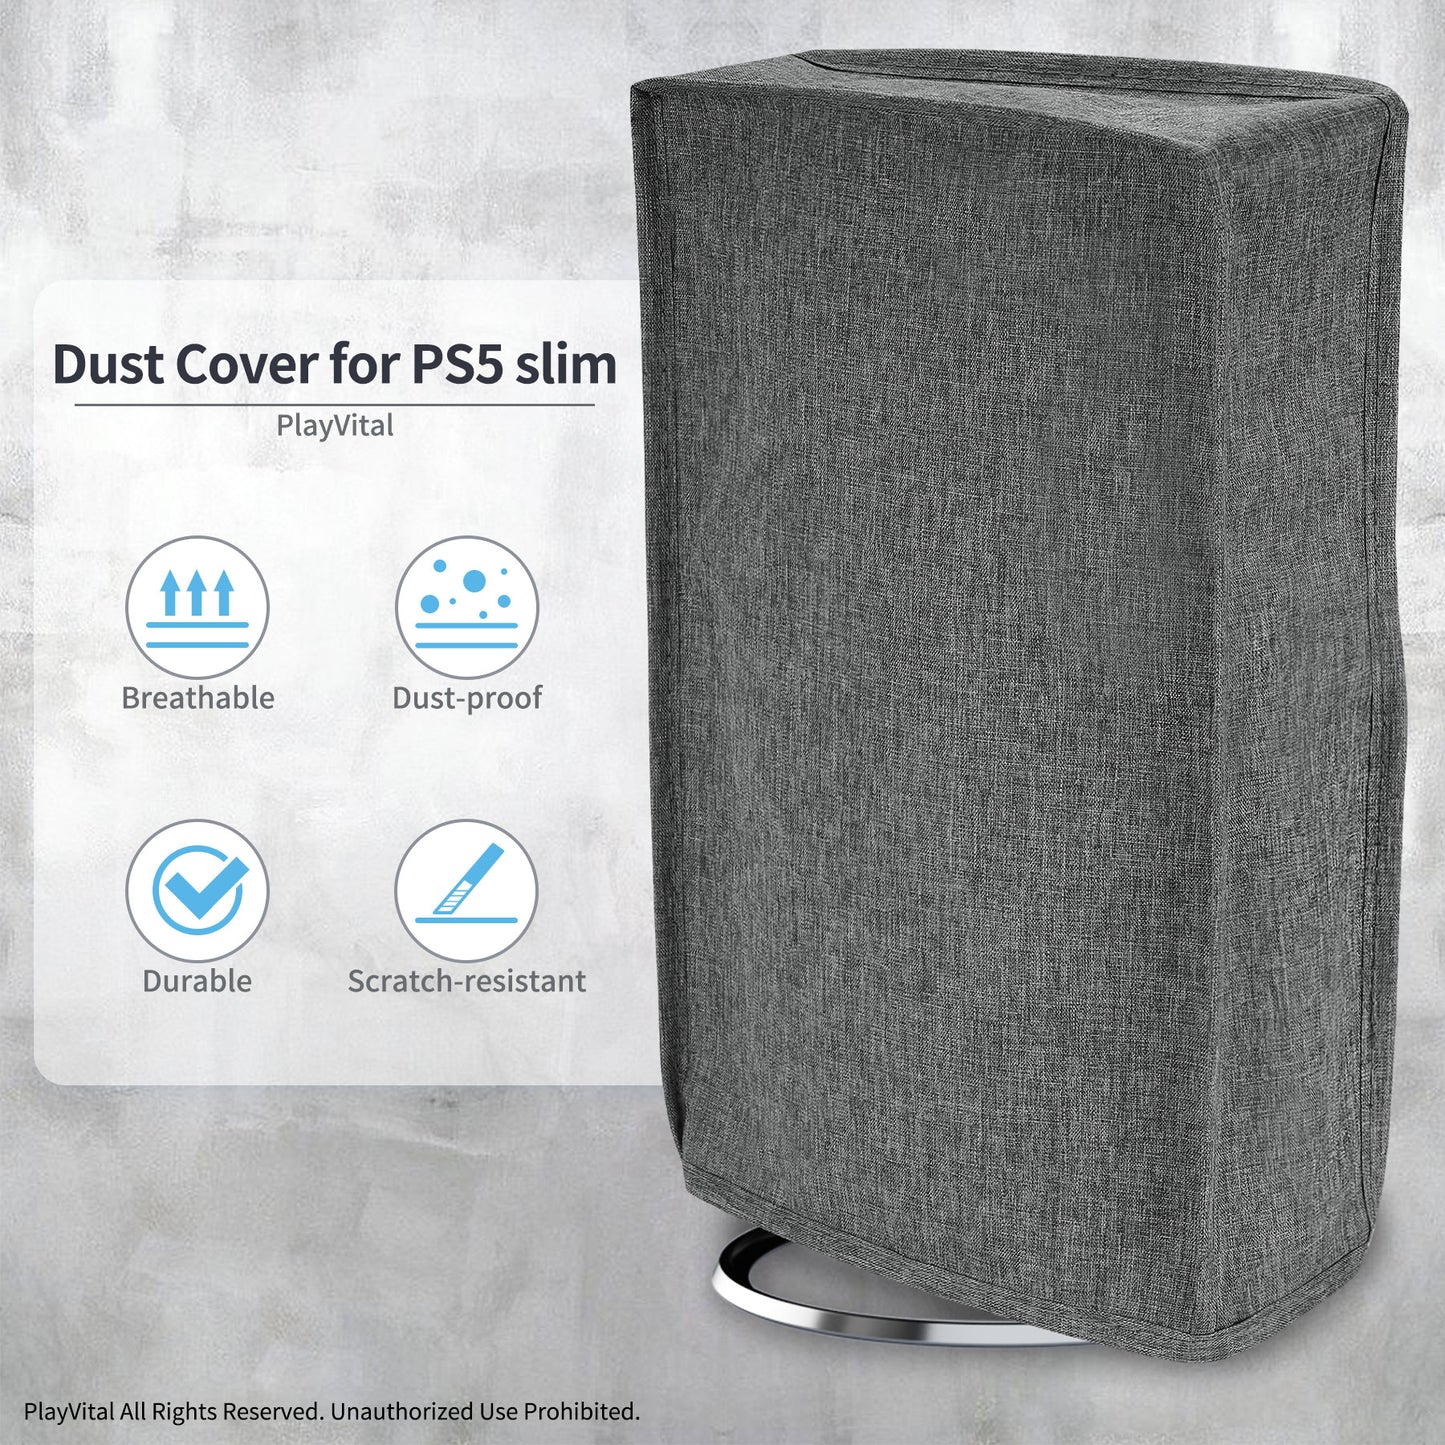 PlayVital Vertical Dust Cover for ps5 Slim Disc Edition(The New Smaller Design), Nylon Dust Proof Protector Waterproof Cover Sleeve for ps5 Slim Console - Gray - BMYPFM002 PlayVital